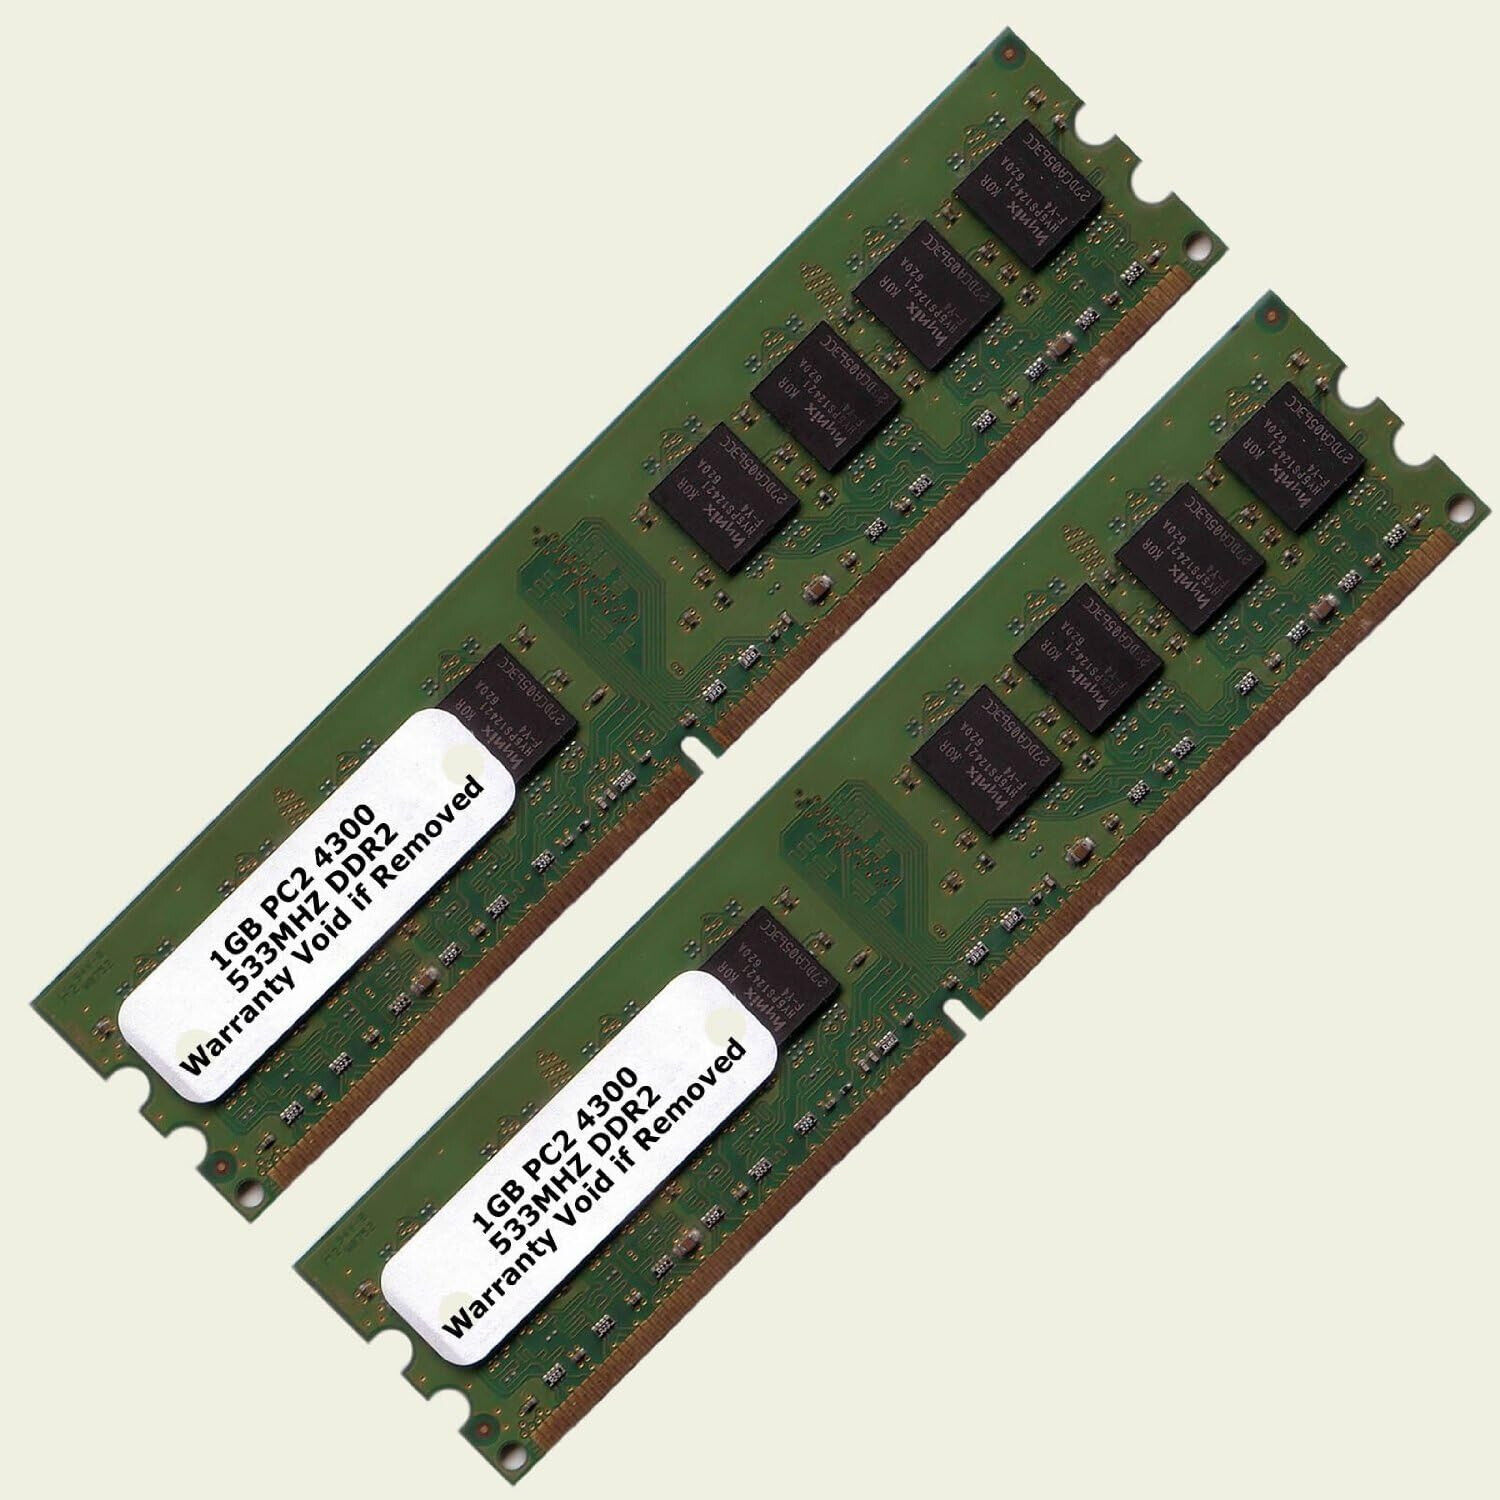 2GB kit [2x1GB] RAM Memory Upgrade for a Dell Dimension 4700 (DDR2-533 PC2-4200)